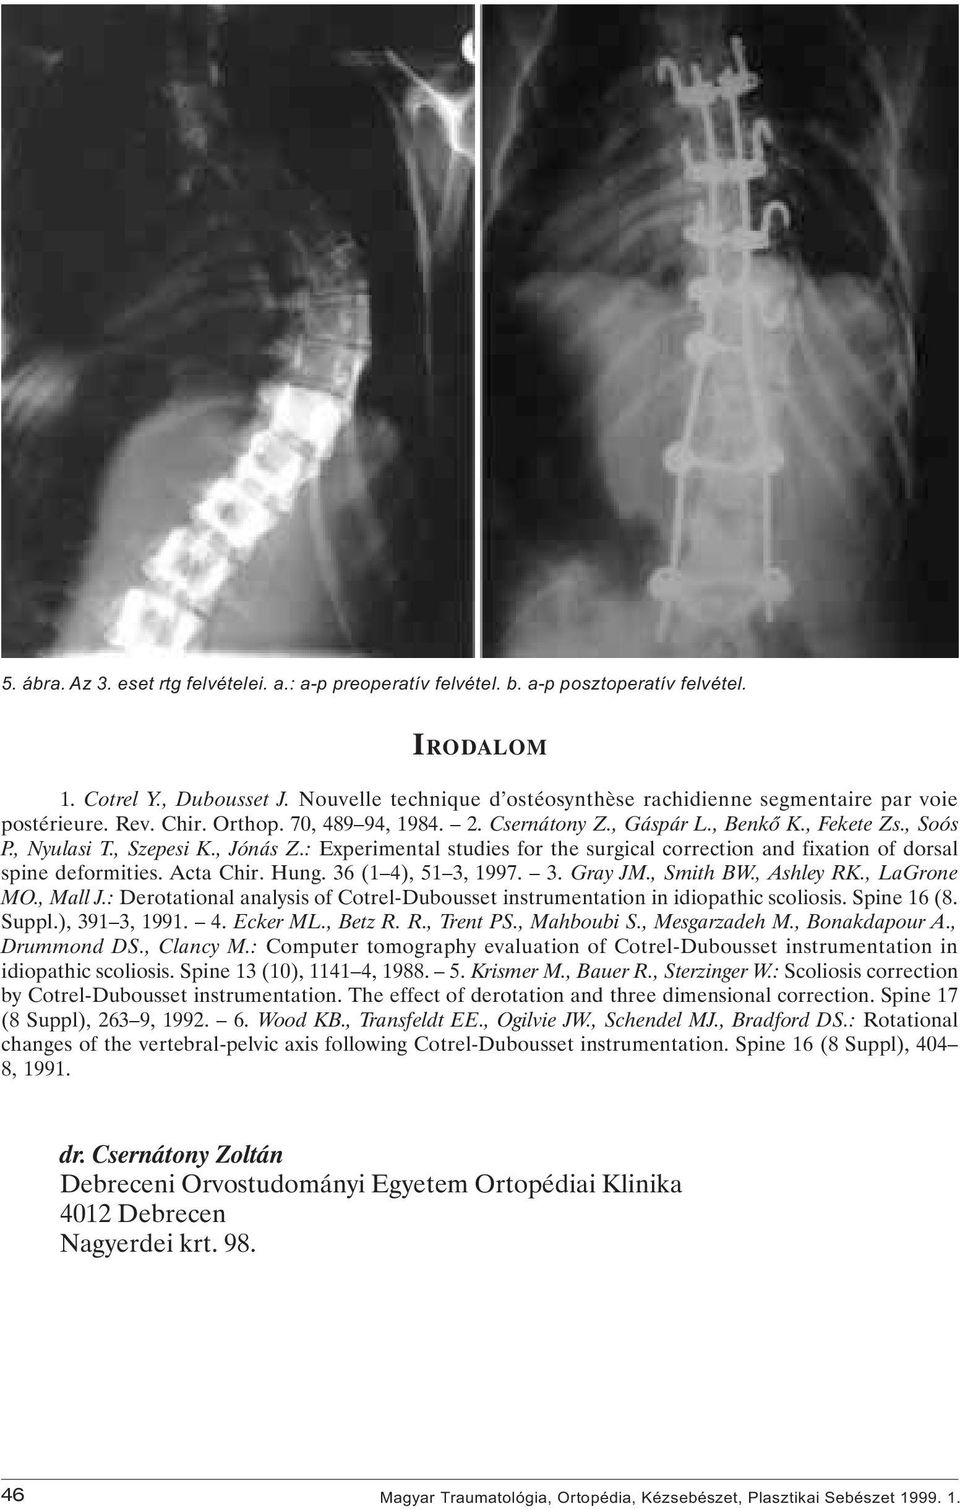 , Jónás Z.: Experimental studies for the surgical correction and fixation of dorsal spine deformities. Acta Chir. Hung. 36 (1 4), 51 3, 1997. 3. Gray JM., Smith BW., Ashley RK., LaGrone MO., Mall J.